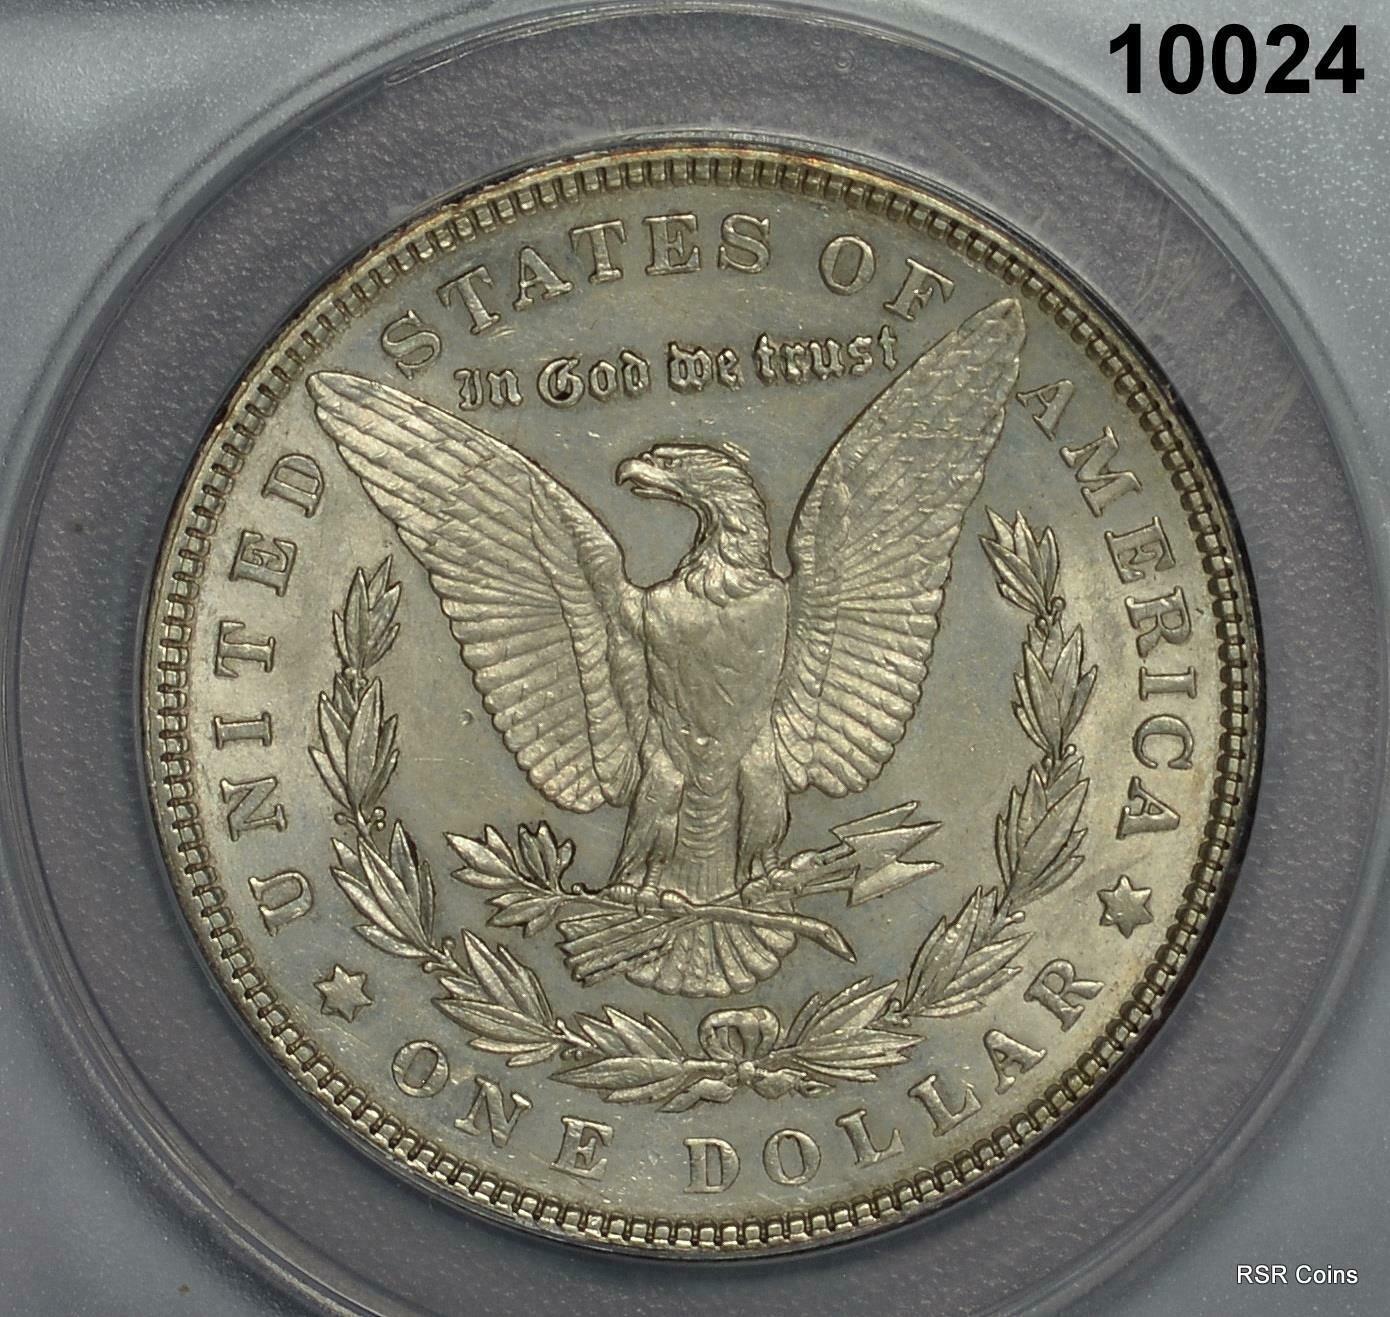 1903 MORGAN SILVER DOLLAR ANACS CERTIFIED AU53 CLEANED #10024